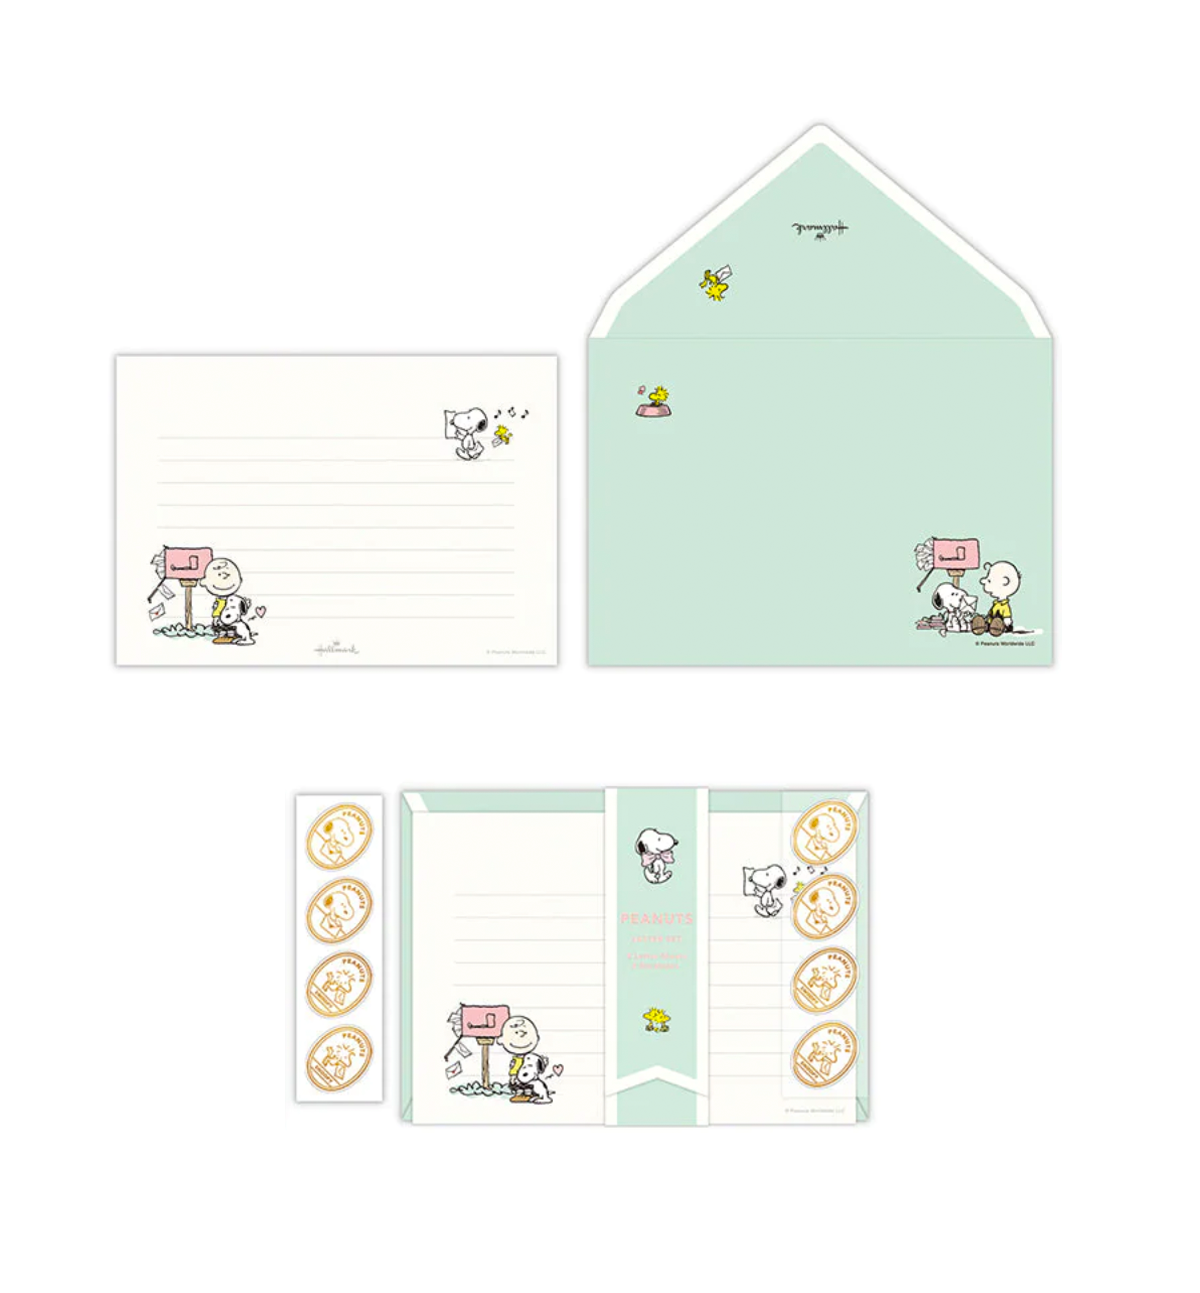 Peanuts Snoopy Be Yourself Letter Set [Mint]